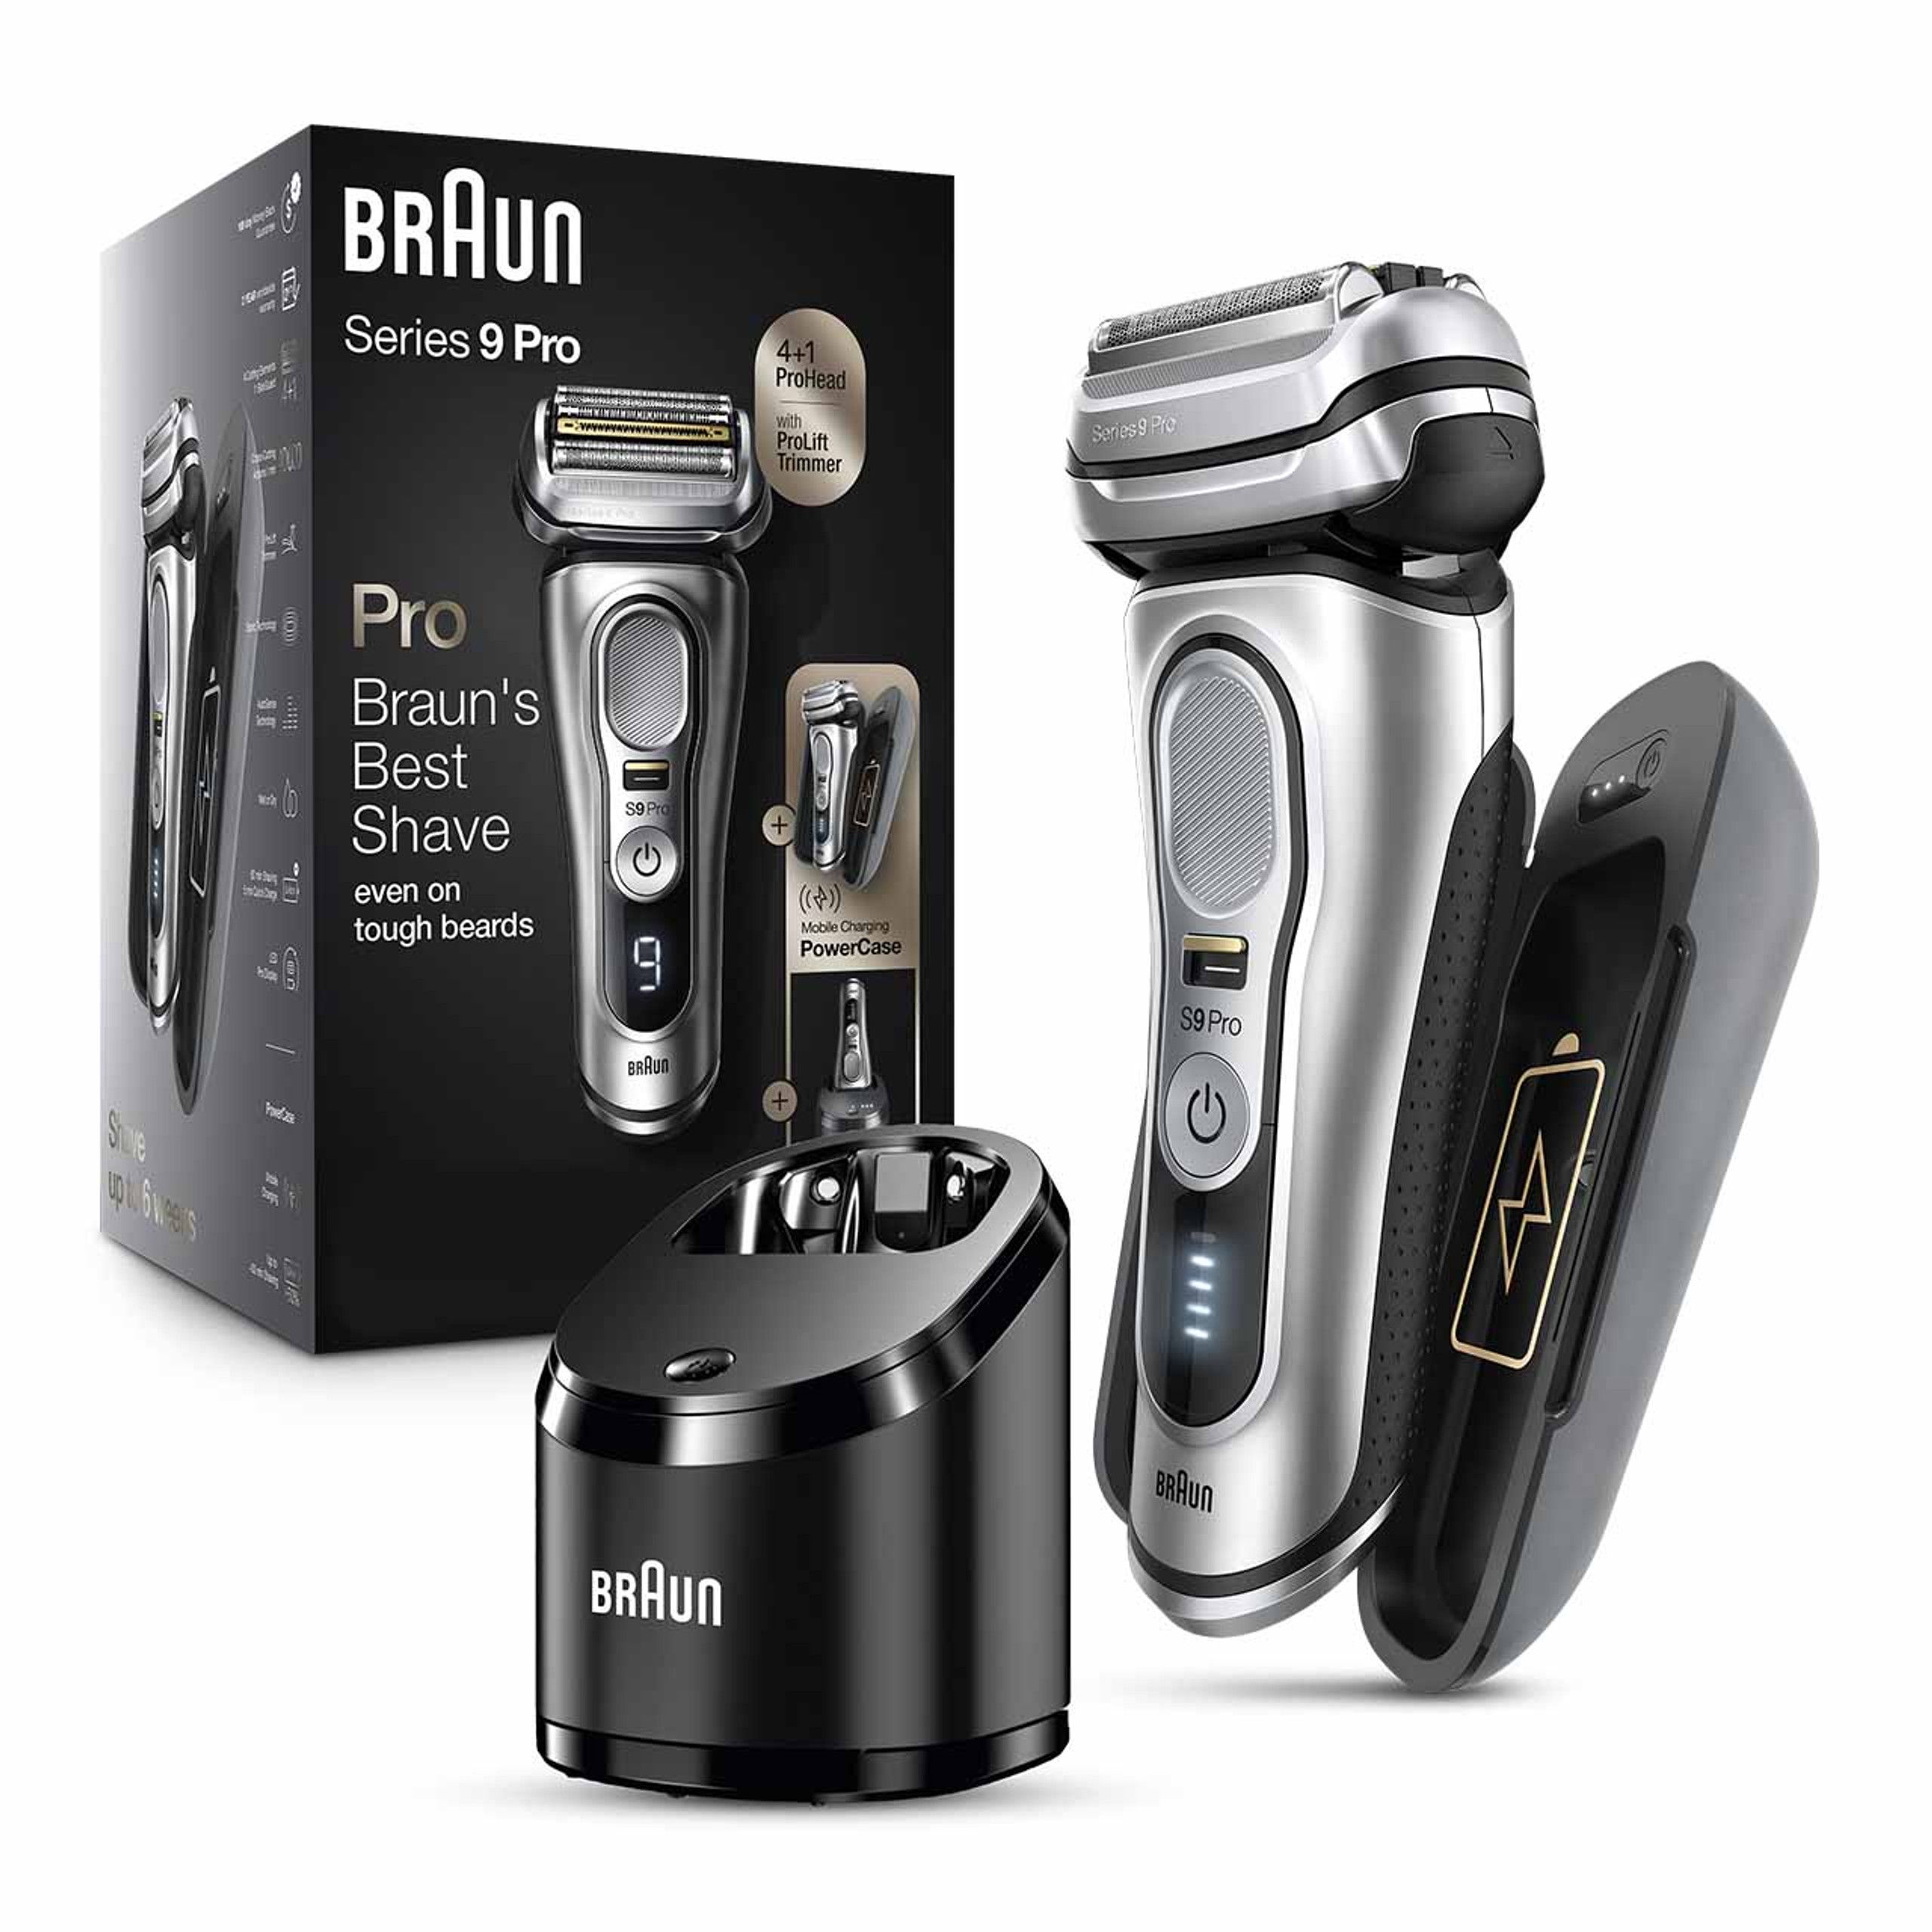 Series 9 Pro Electric Shaver